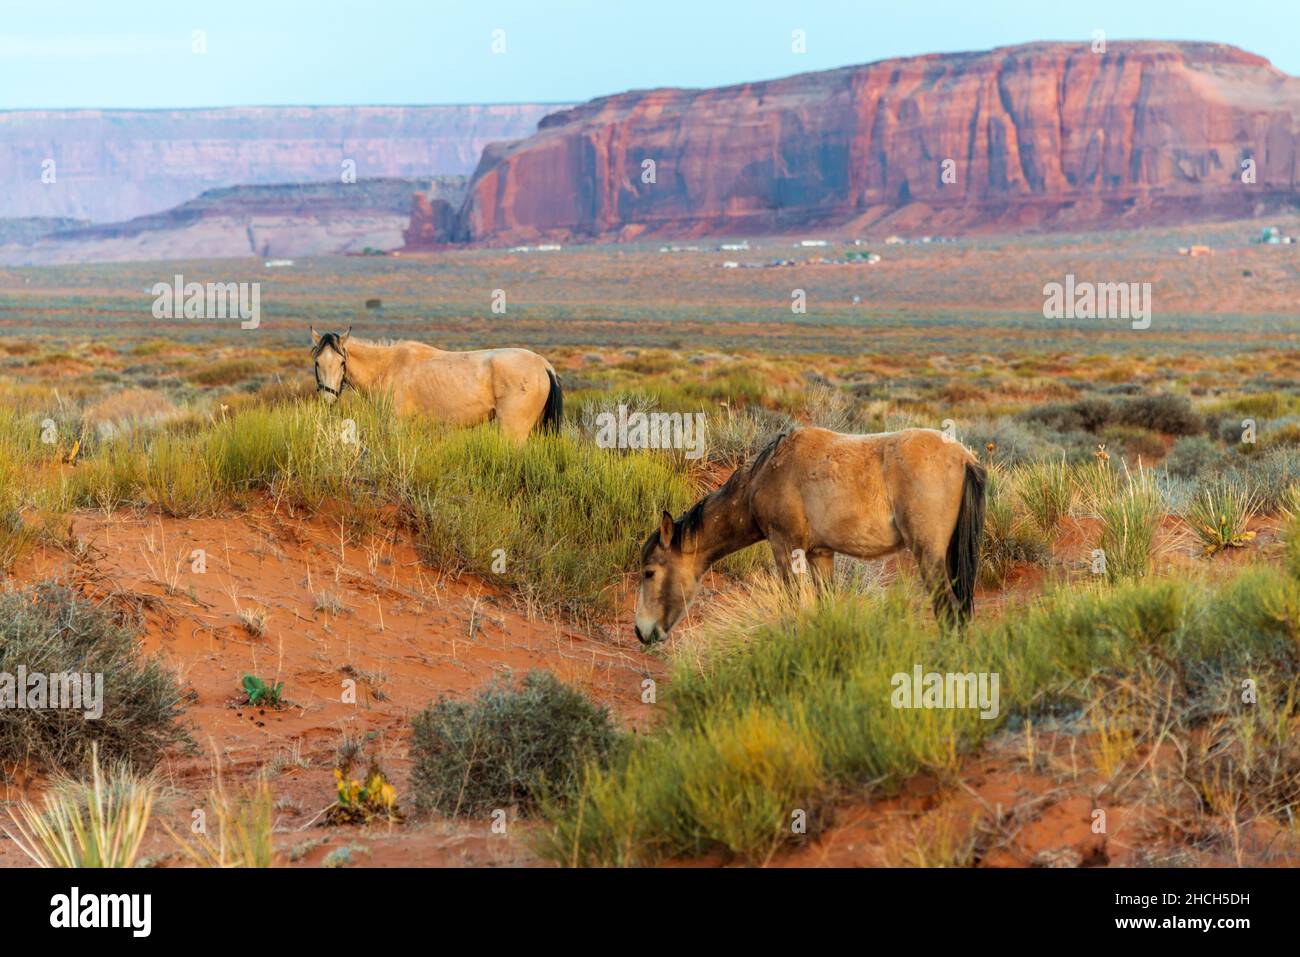 Two horses graze on grass in Monument Valley Stock Photo